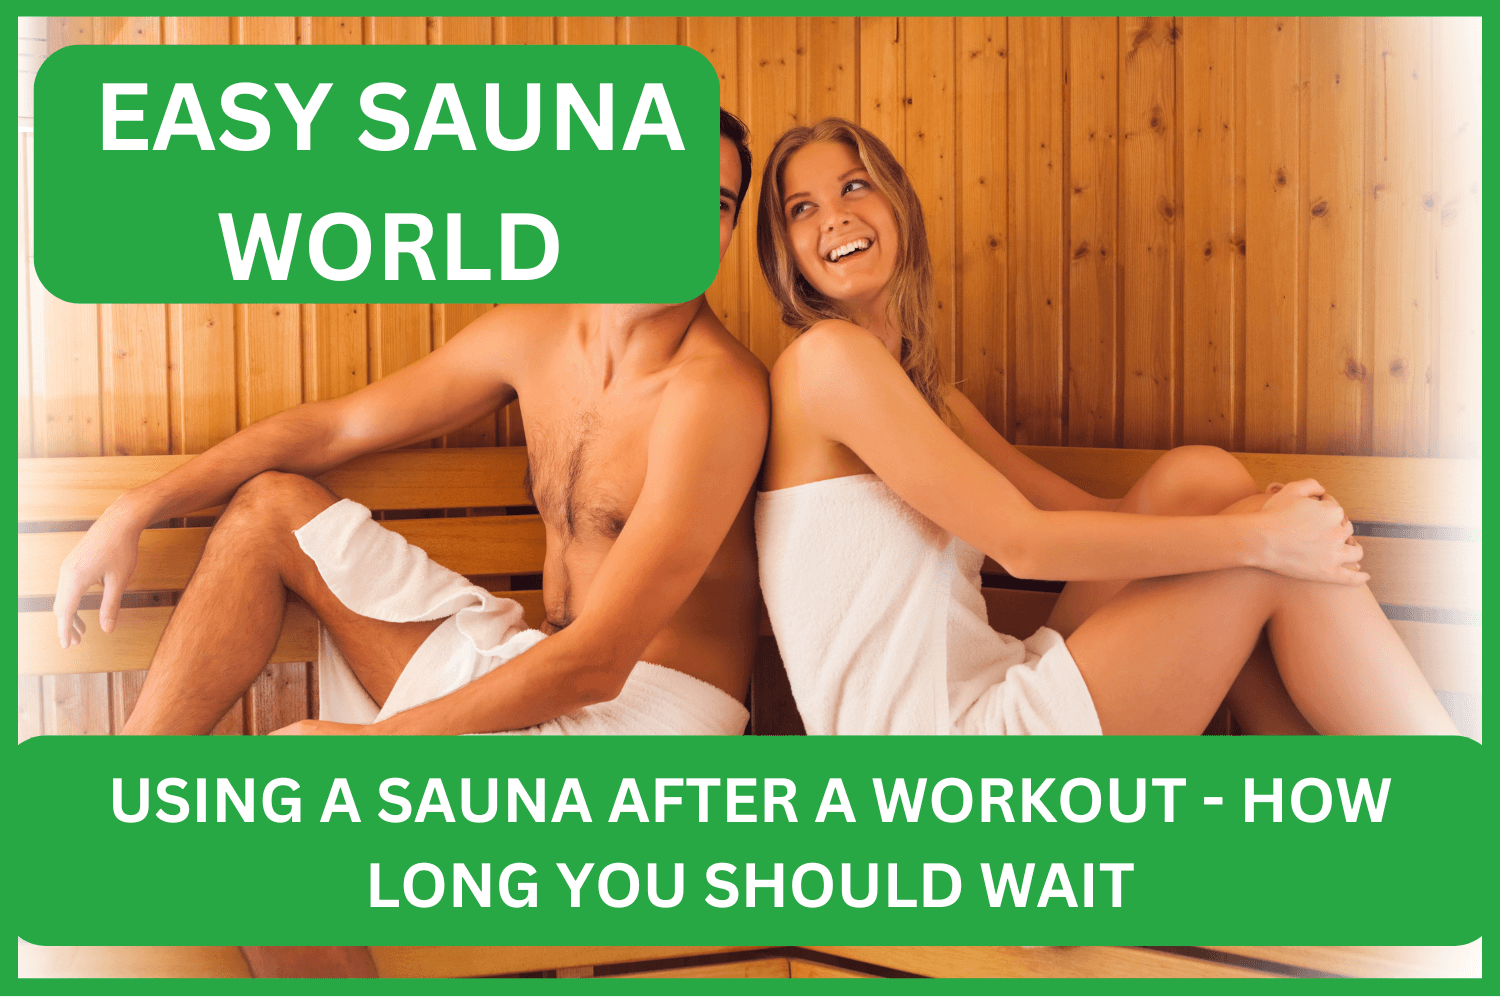 How long to use a sauna after a workout?